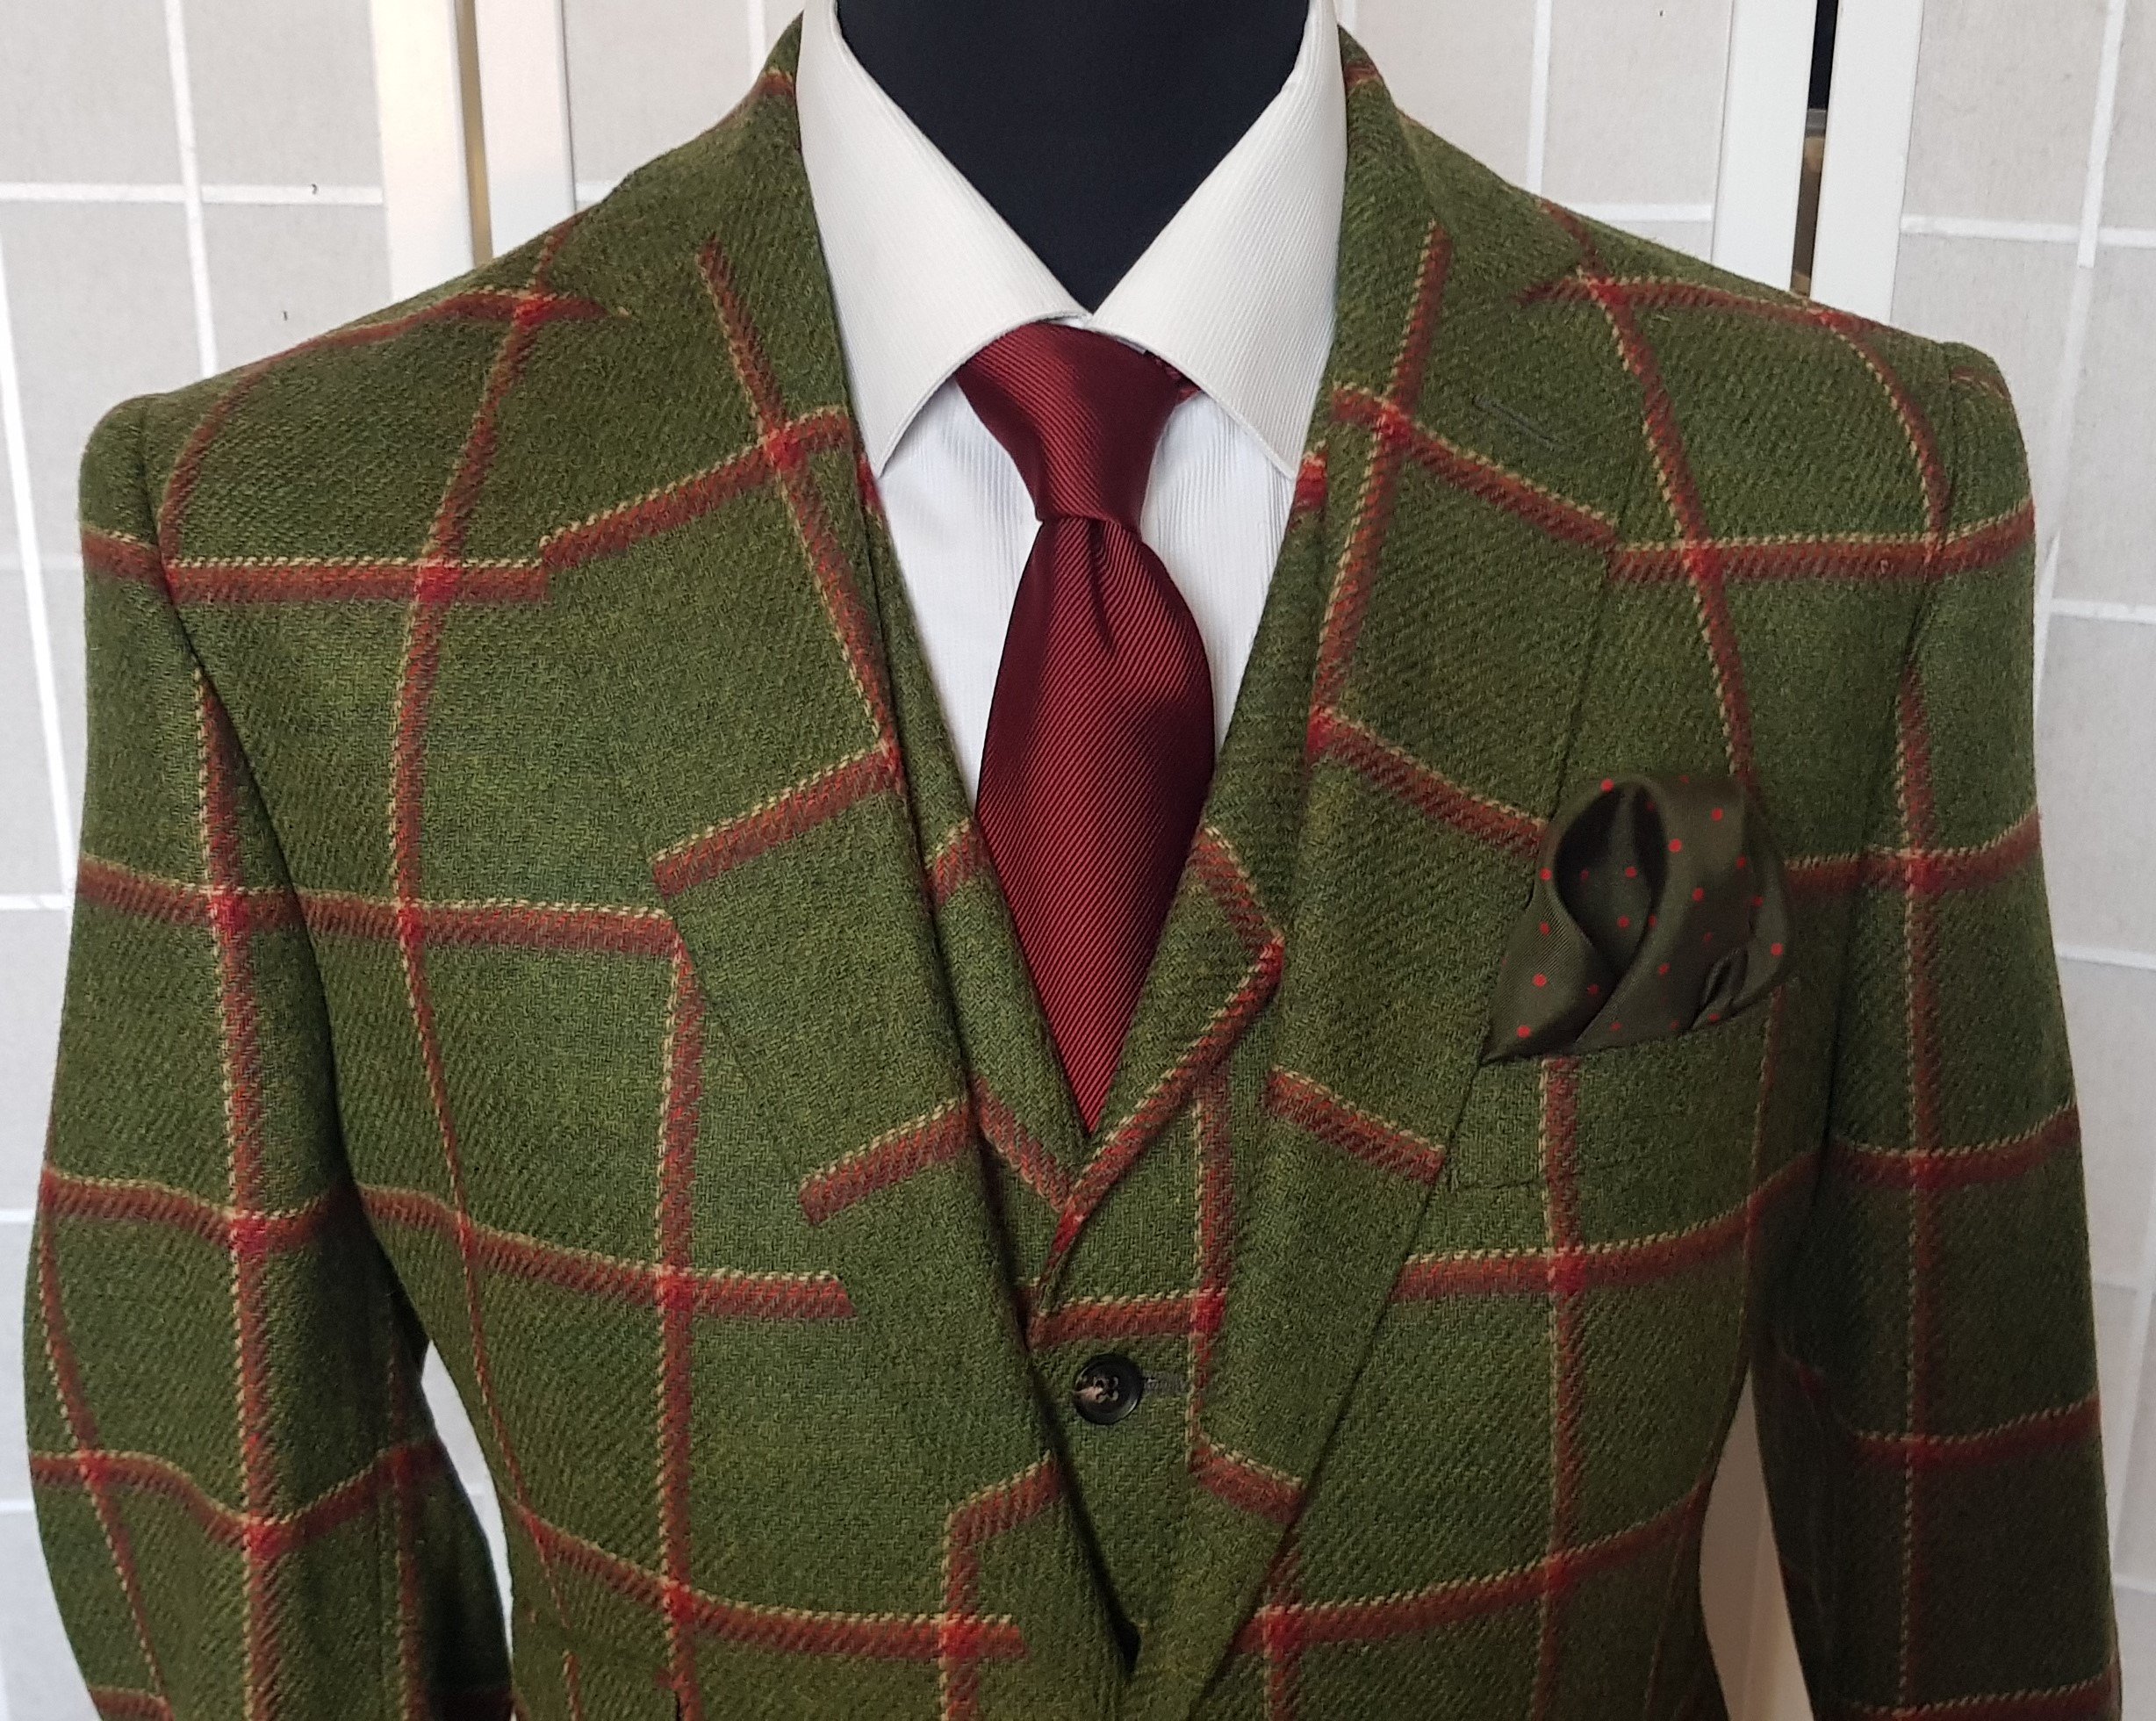 3 piece suit in red and green tweed (8).jpg